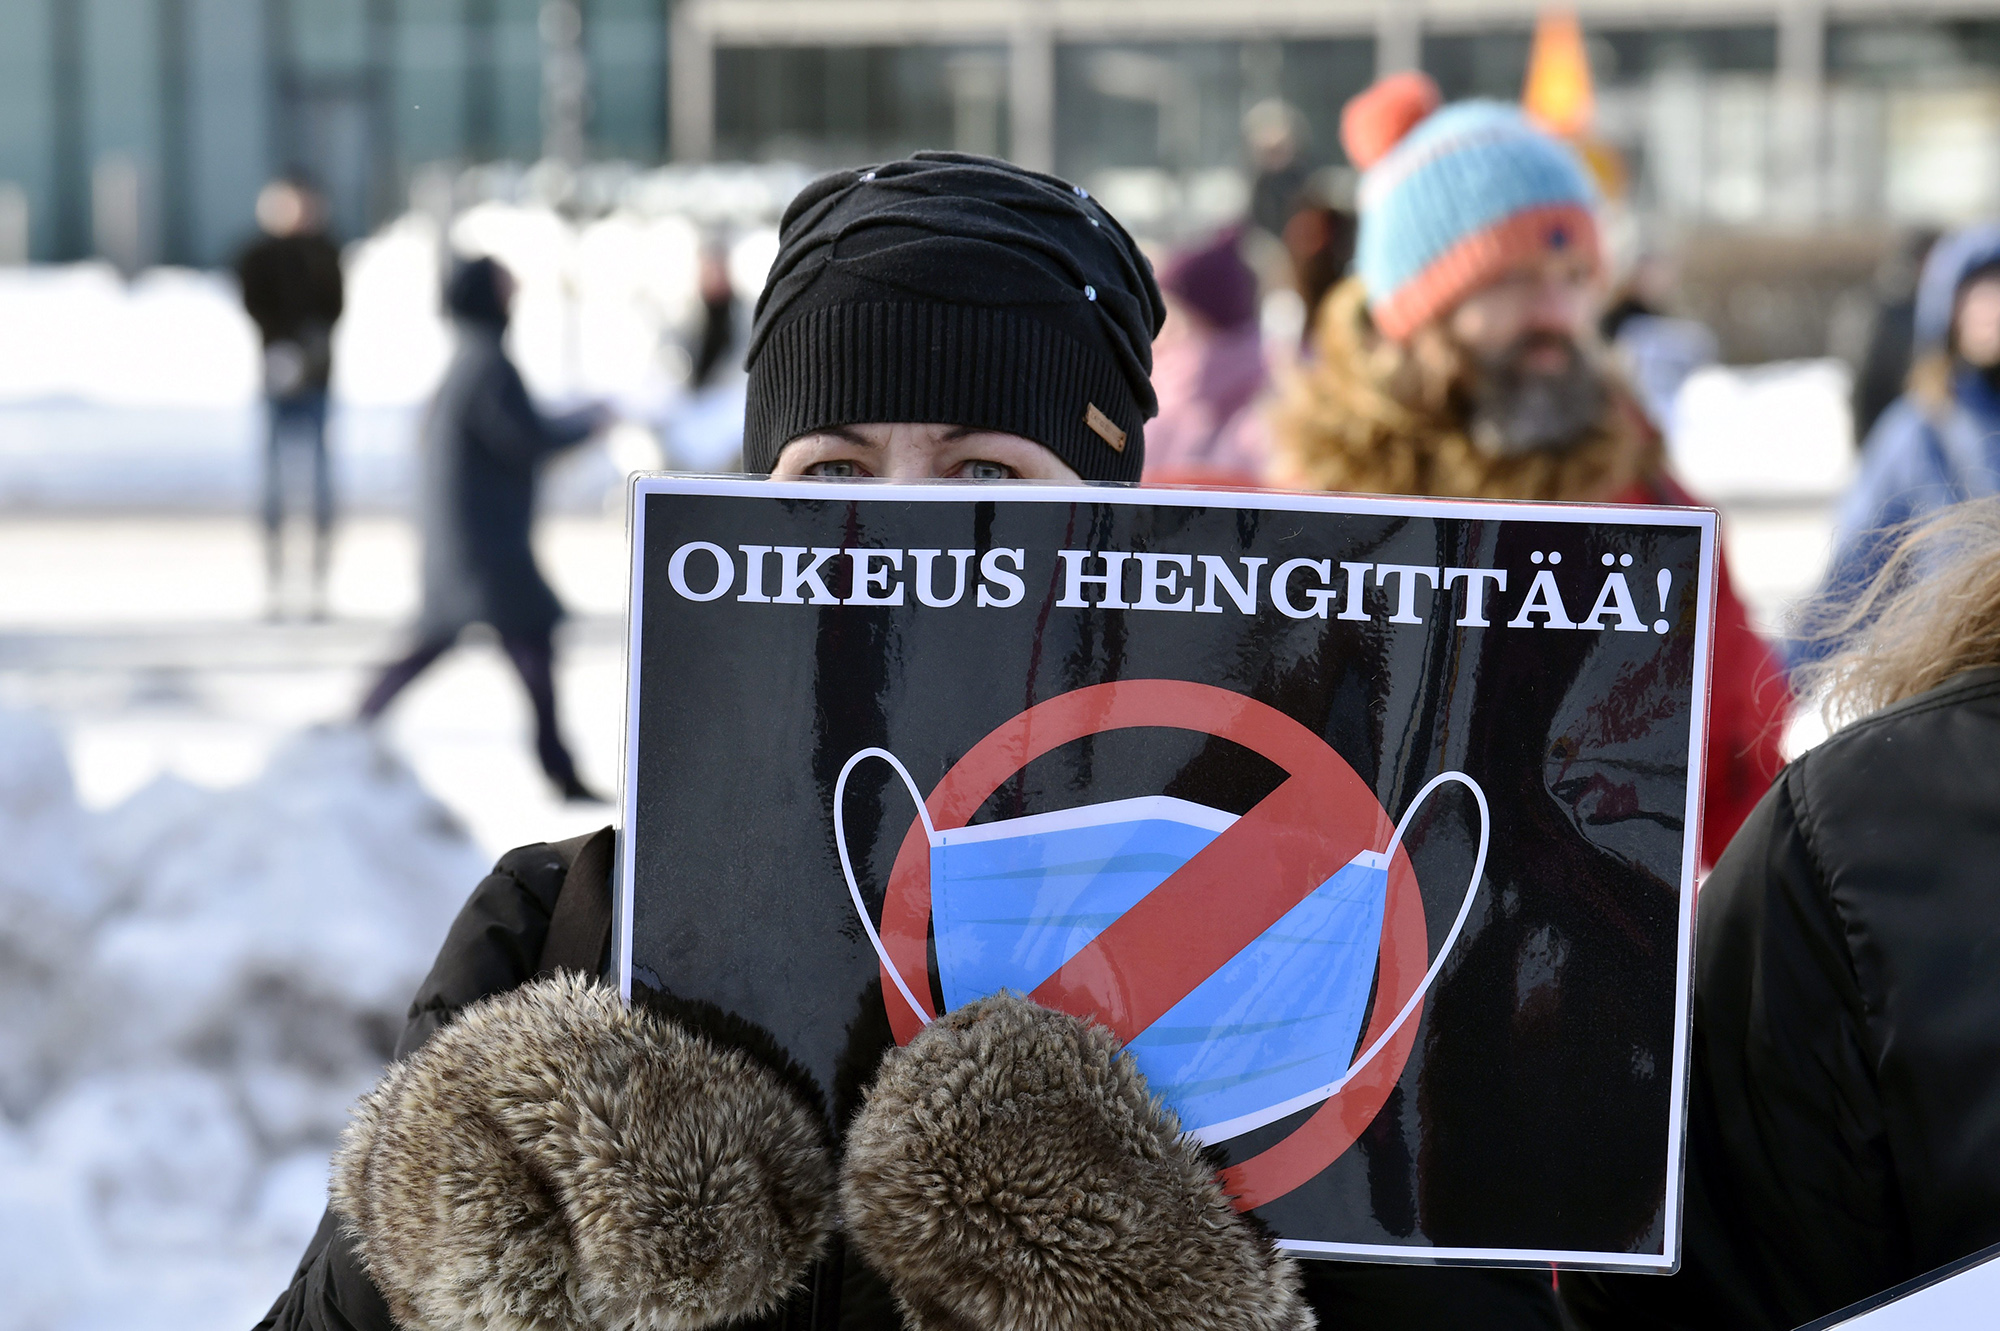 Protesters in Helsinki oppose Covid restrictions